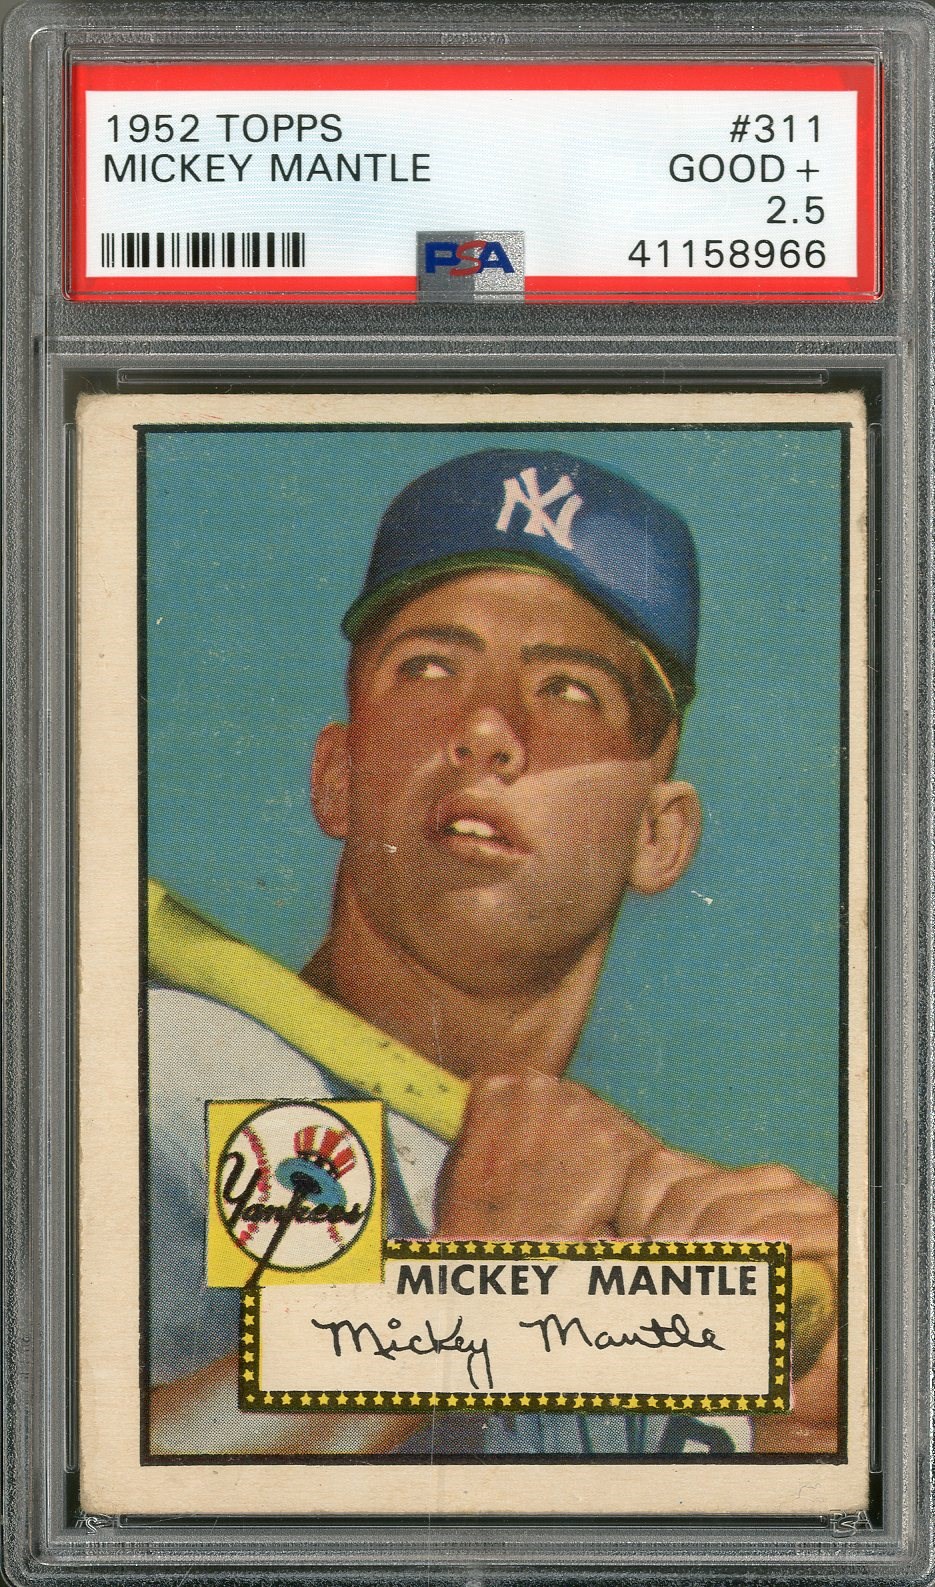 Baseball and Trading Cards - 1952 Topps Mickey Mantle #311 Rookie (PSA GD+ 2.5)